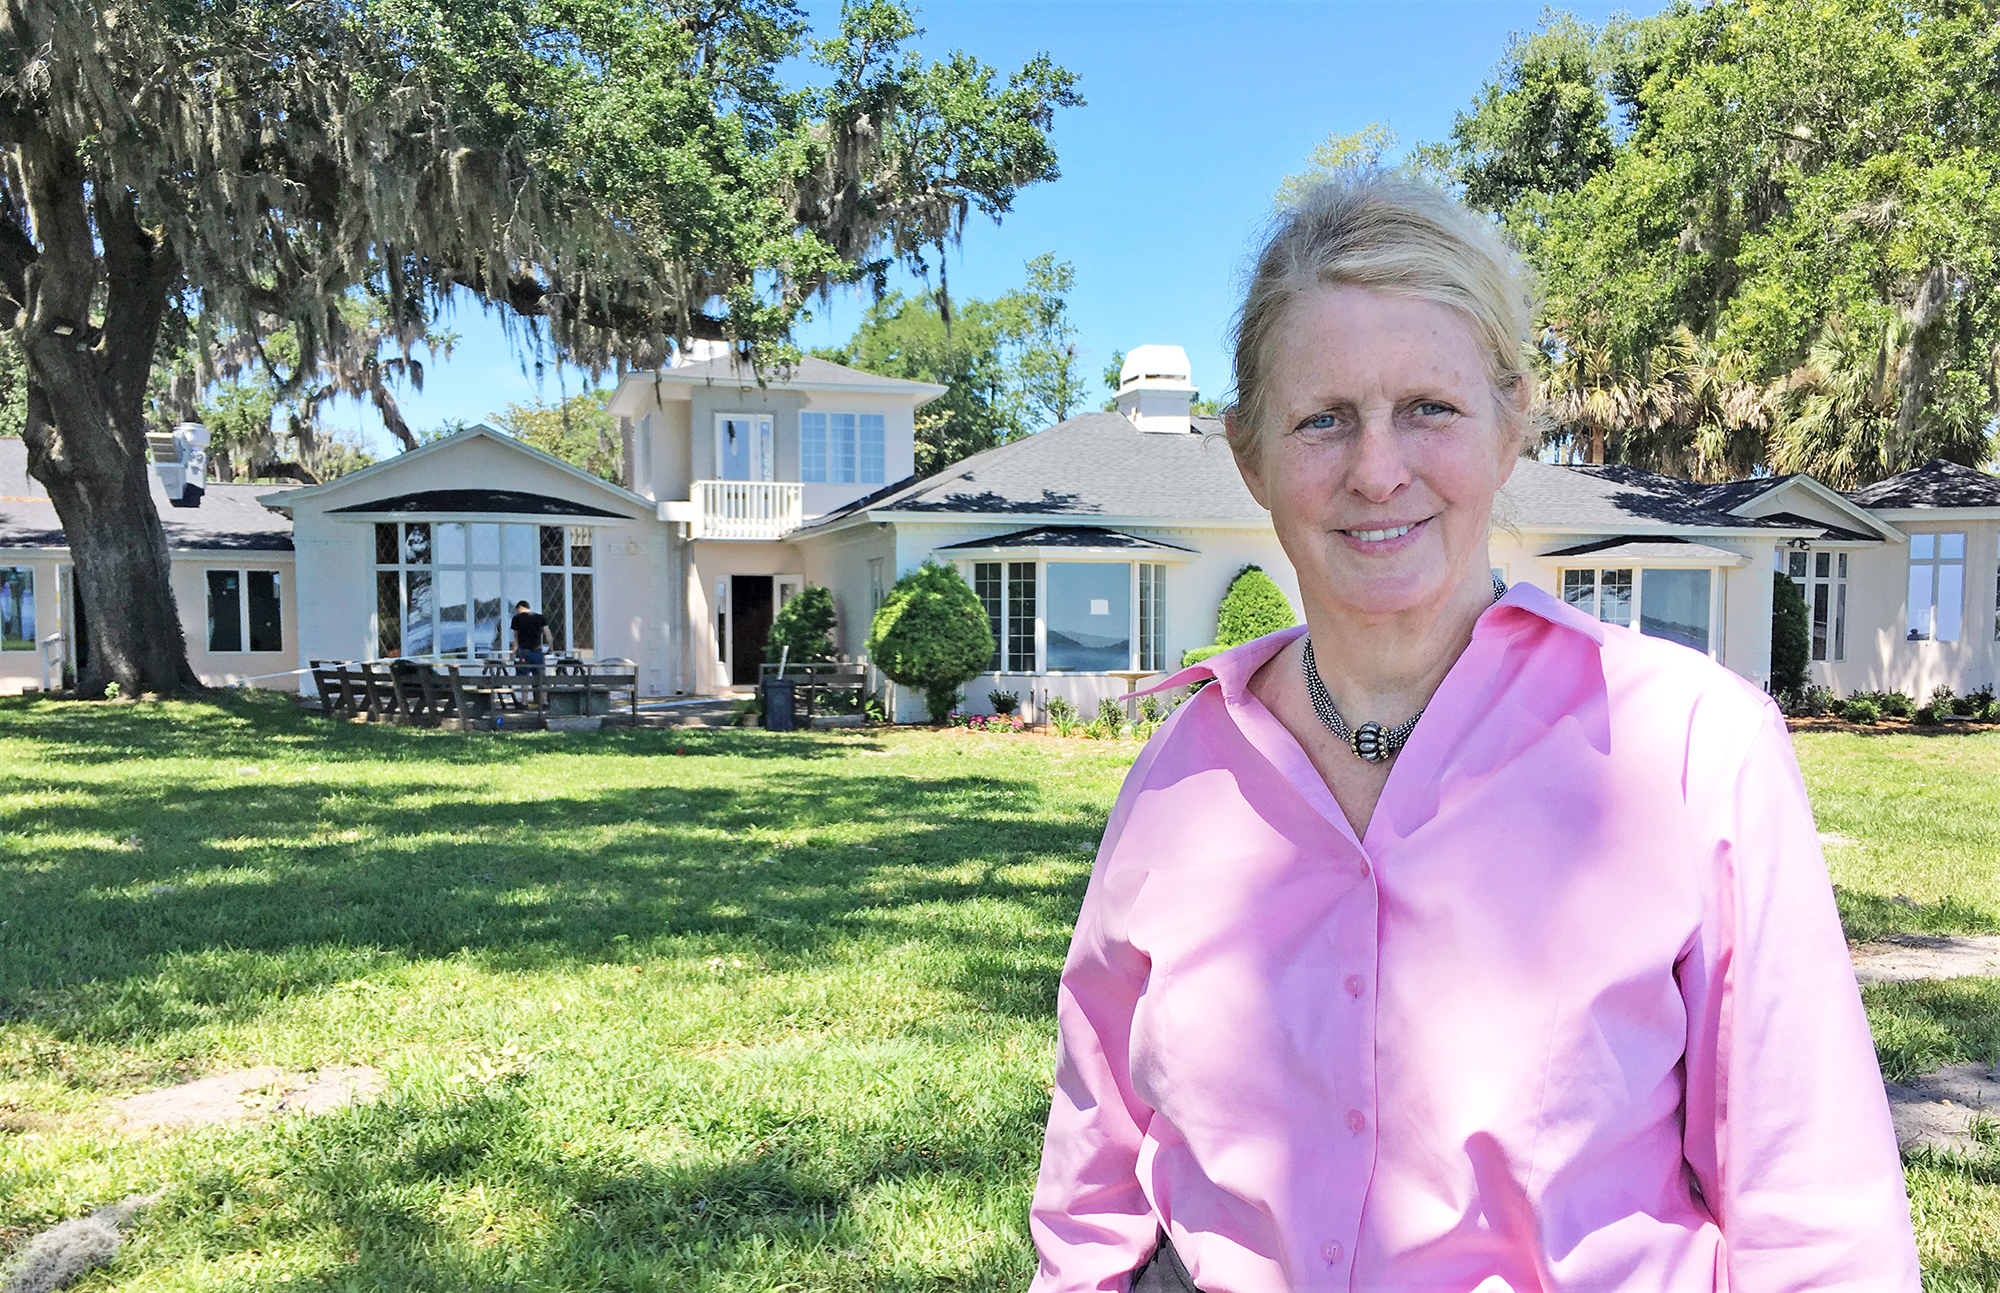 Karrie Massee owns The Club Continental and Azaleana Manor hotels.